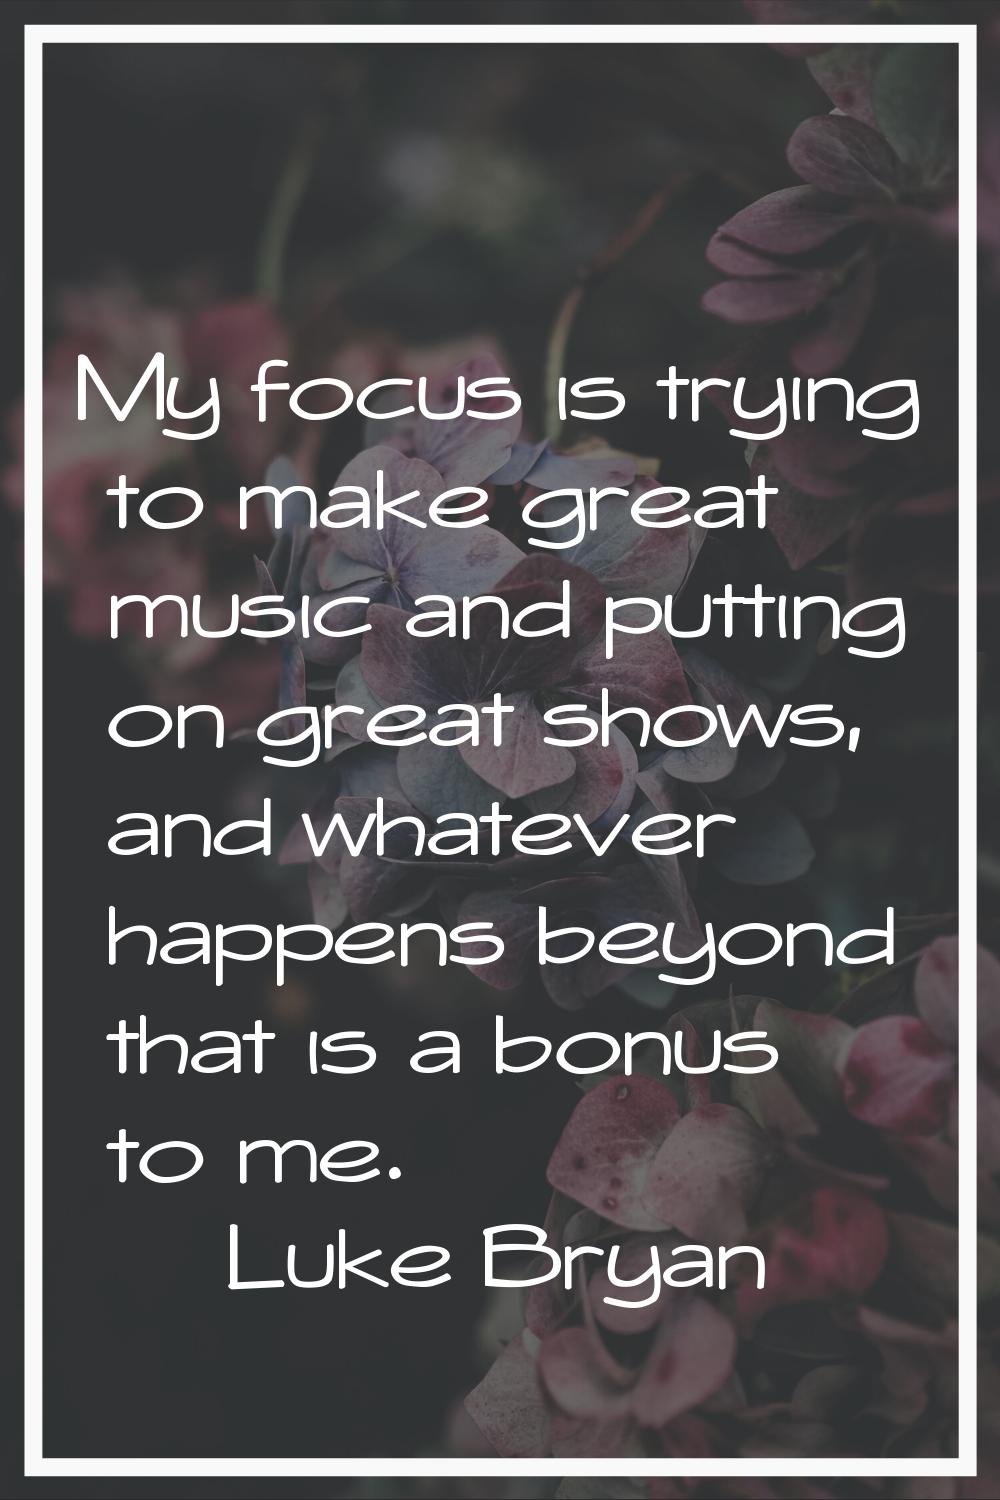 My focus is trying to make great music and putting on great shows, and whatever happens beyond that